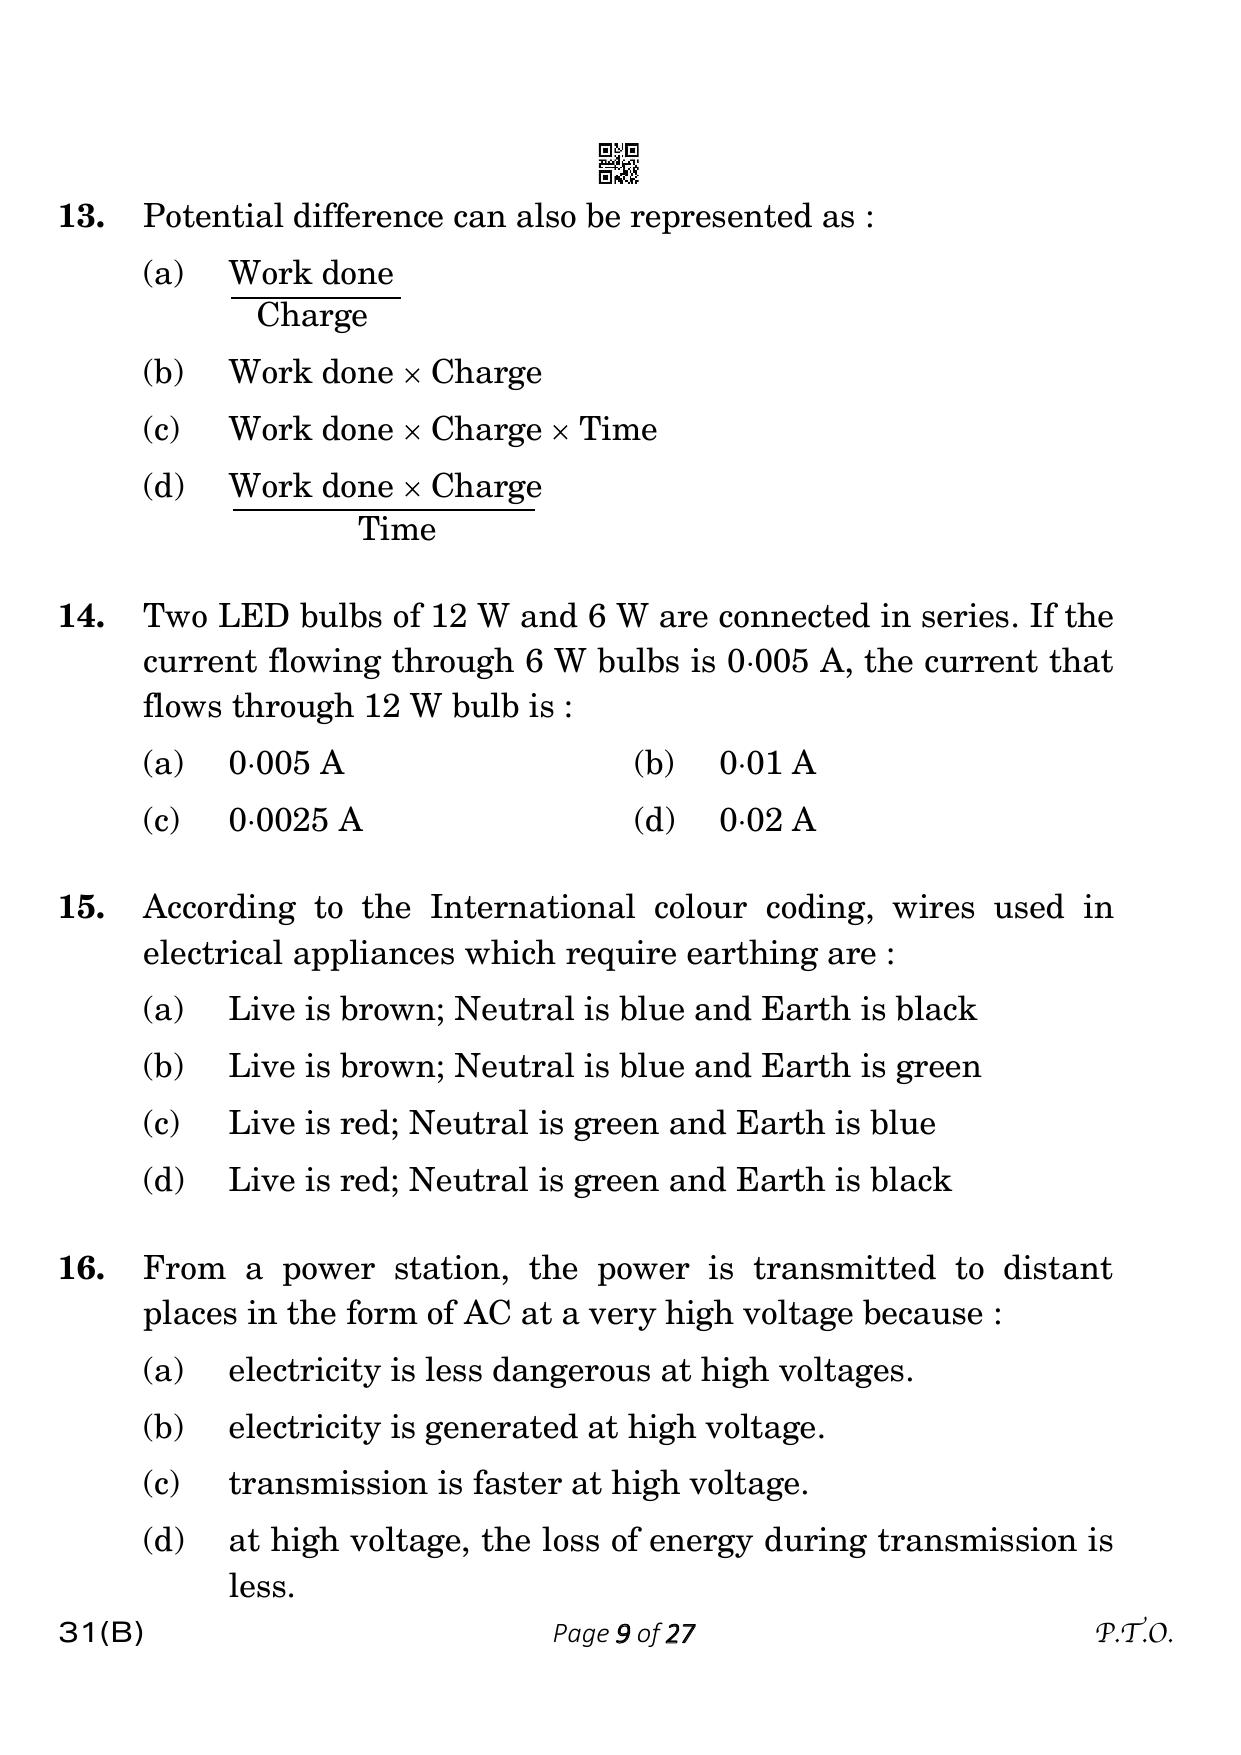 CBSE Class 10 31-B Science 2023 (Compartment) Question Paper - Page 9